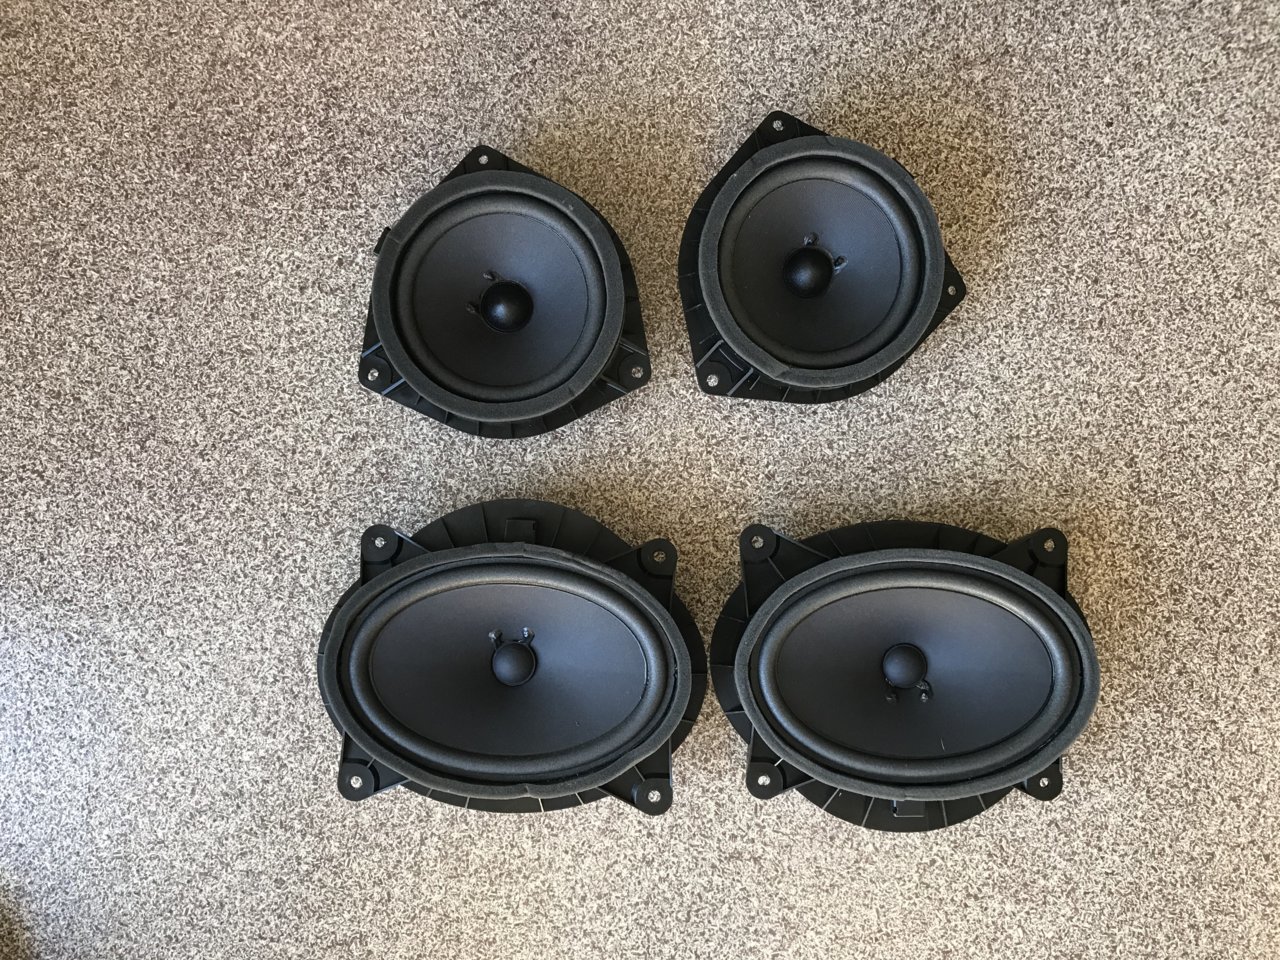 FOUND NEW HOME: 2017 Non-JBL Speakers & Amp - Free to Good Home